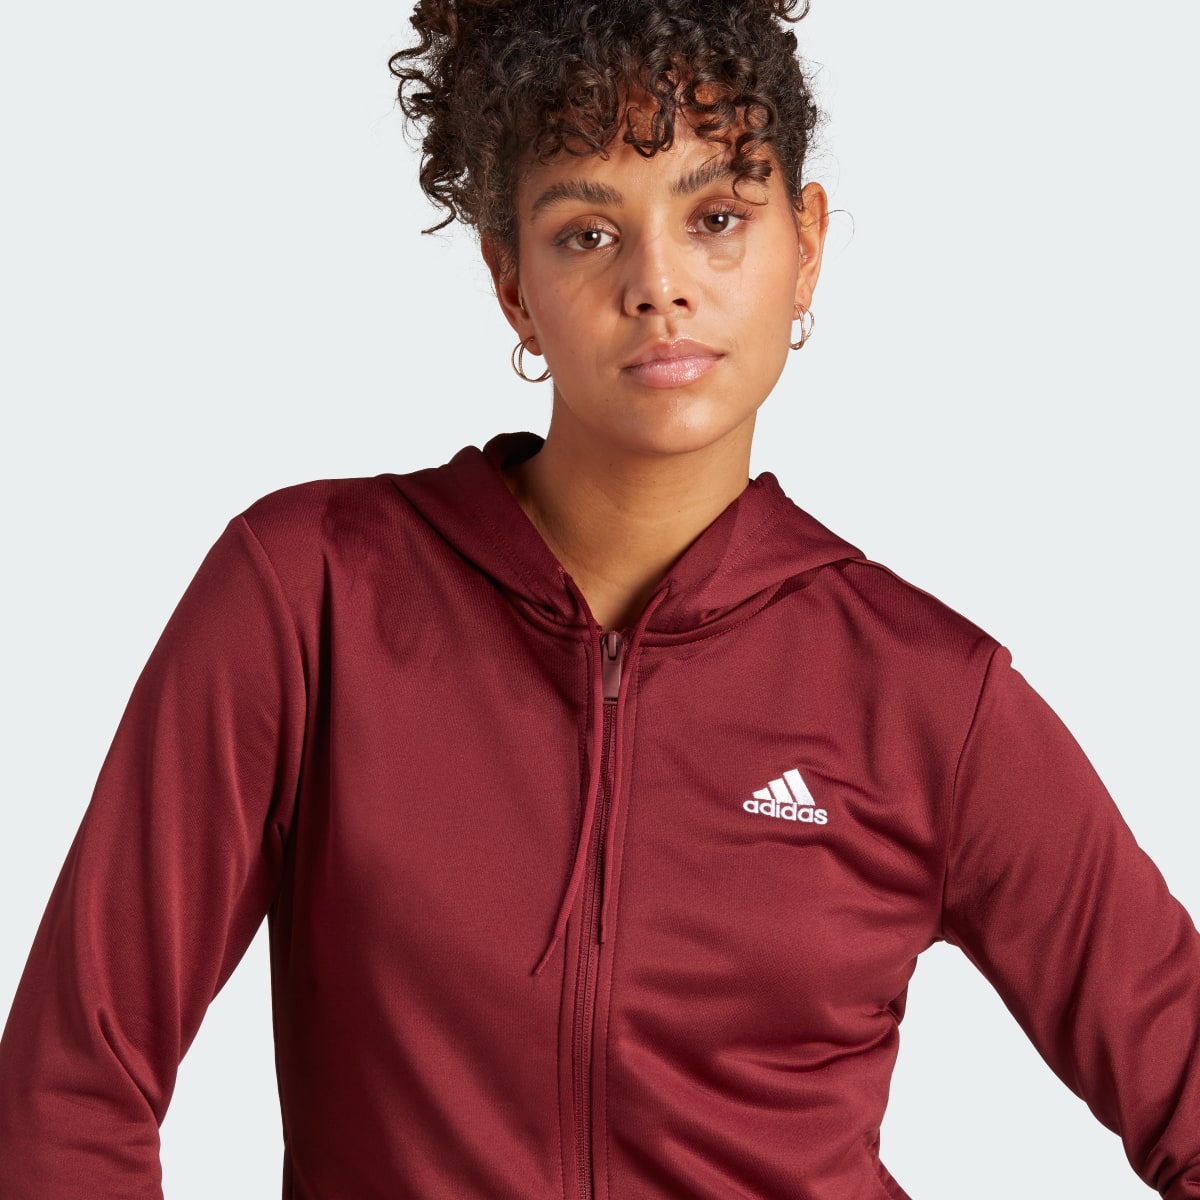 Adidas Linear Track Suit. 8